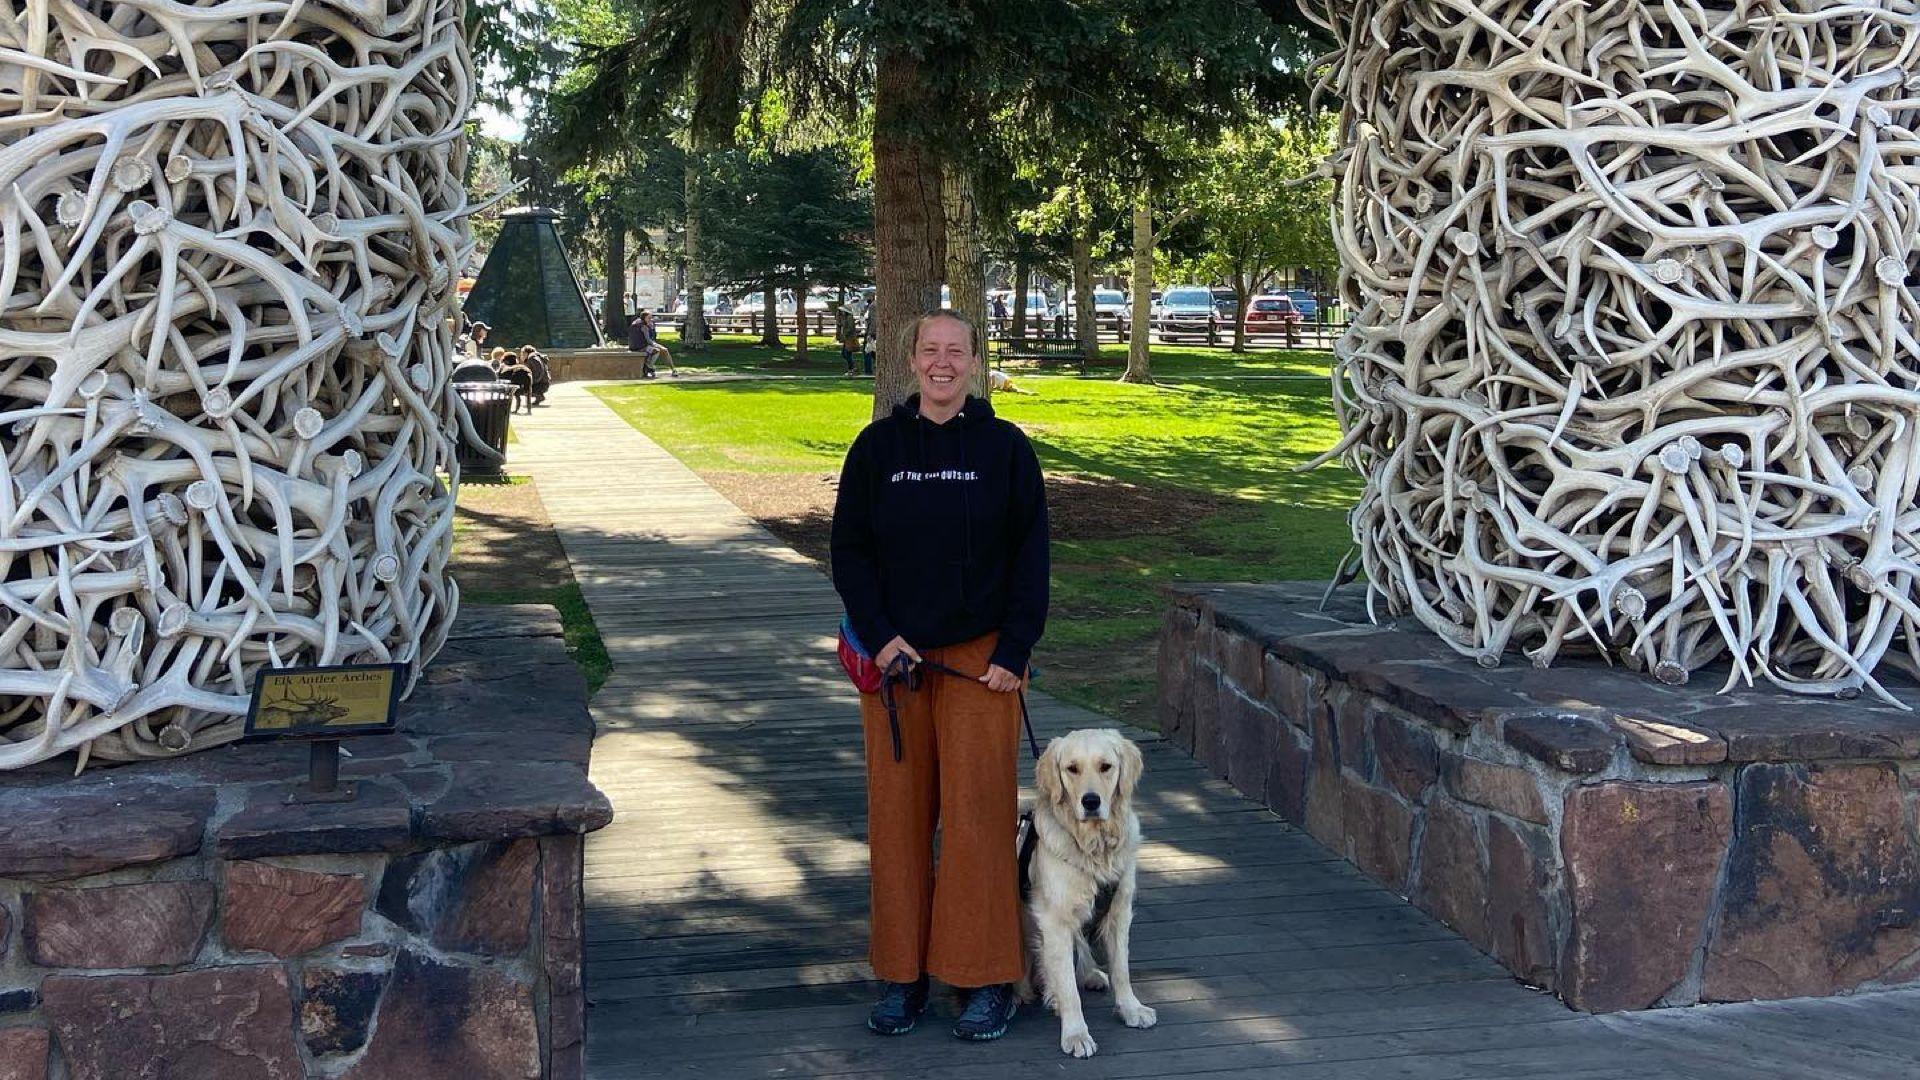 Angela and her service dog Raider stand under Jackson Hole's Elk Antler Arch at Yellowstone National